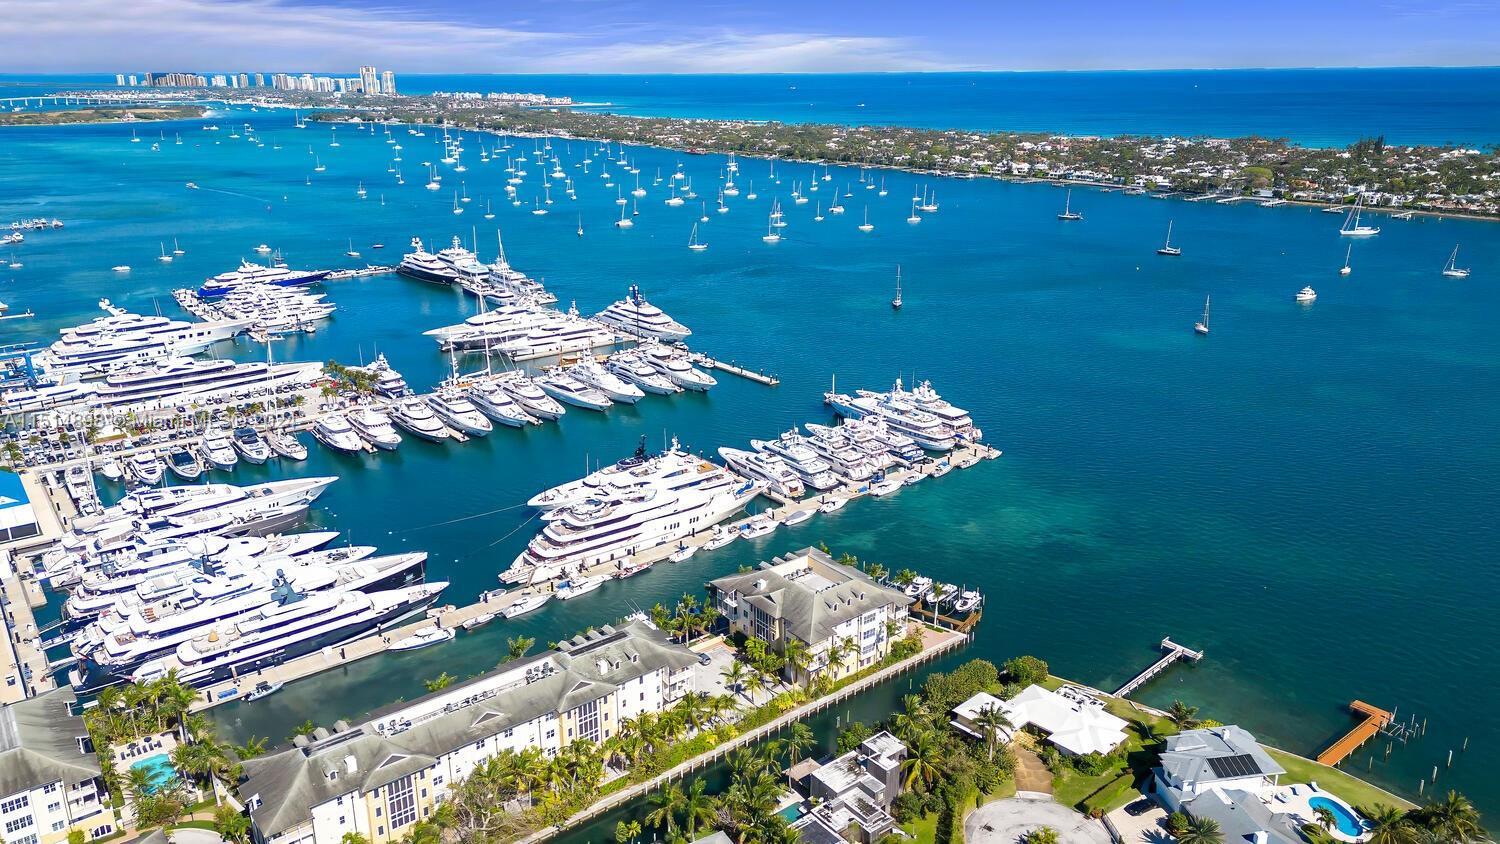 RECENTLY LISTED! prestige West Palm Beach, built in 2021. Just bring your tooth brush and move-in. A